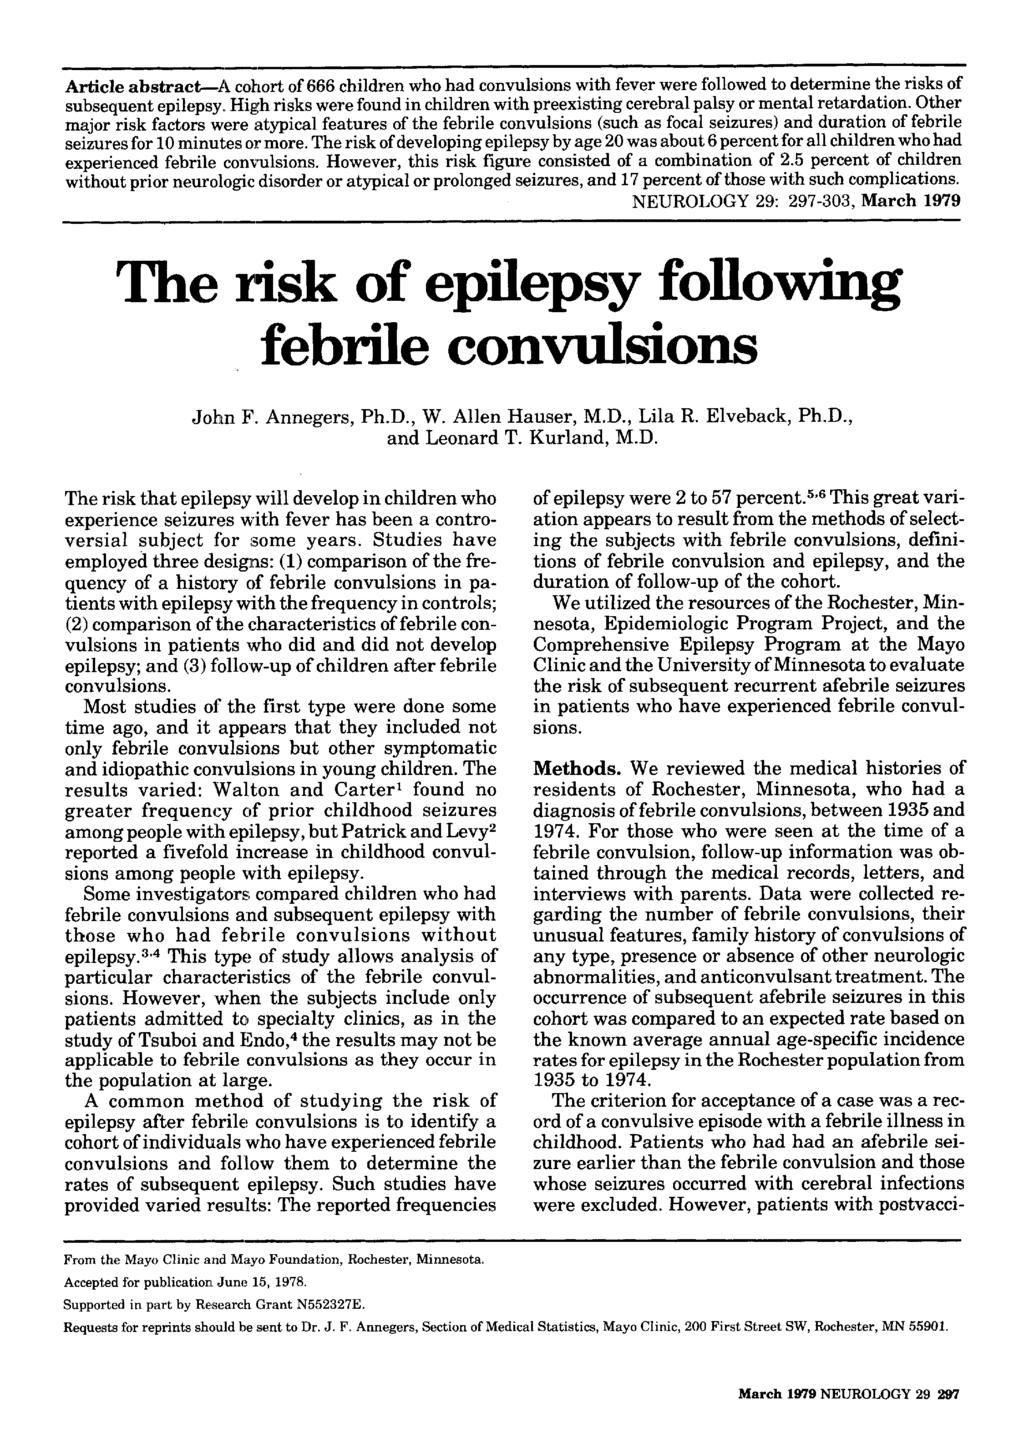 ~~ Article abstract41 cohort of 666 children who had convulsions with fever were followed to determine the risks of subsequent epilepsy High risks were found in children with preexisting cerebral